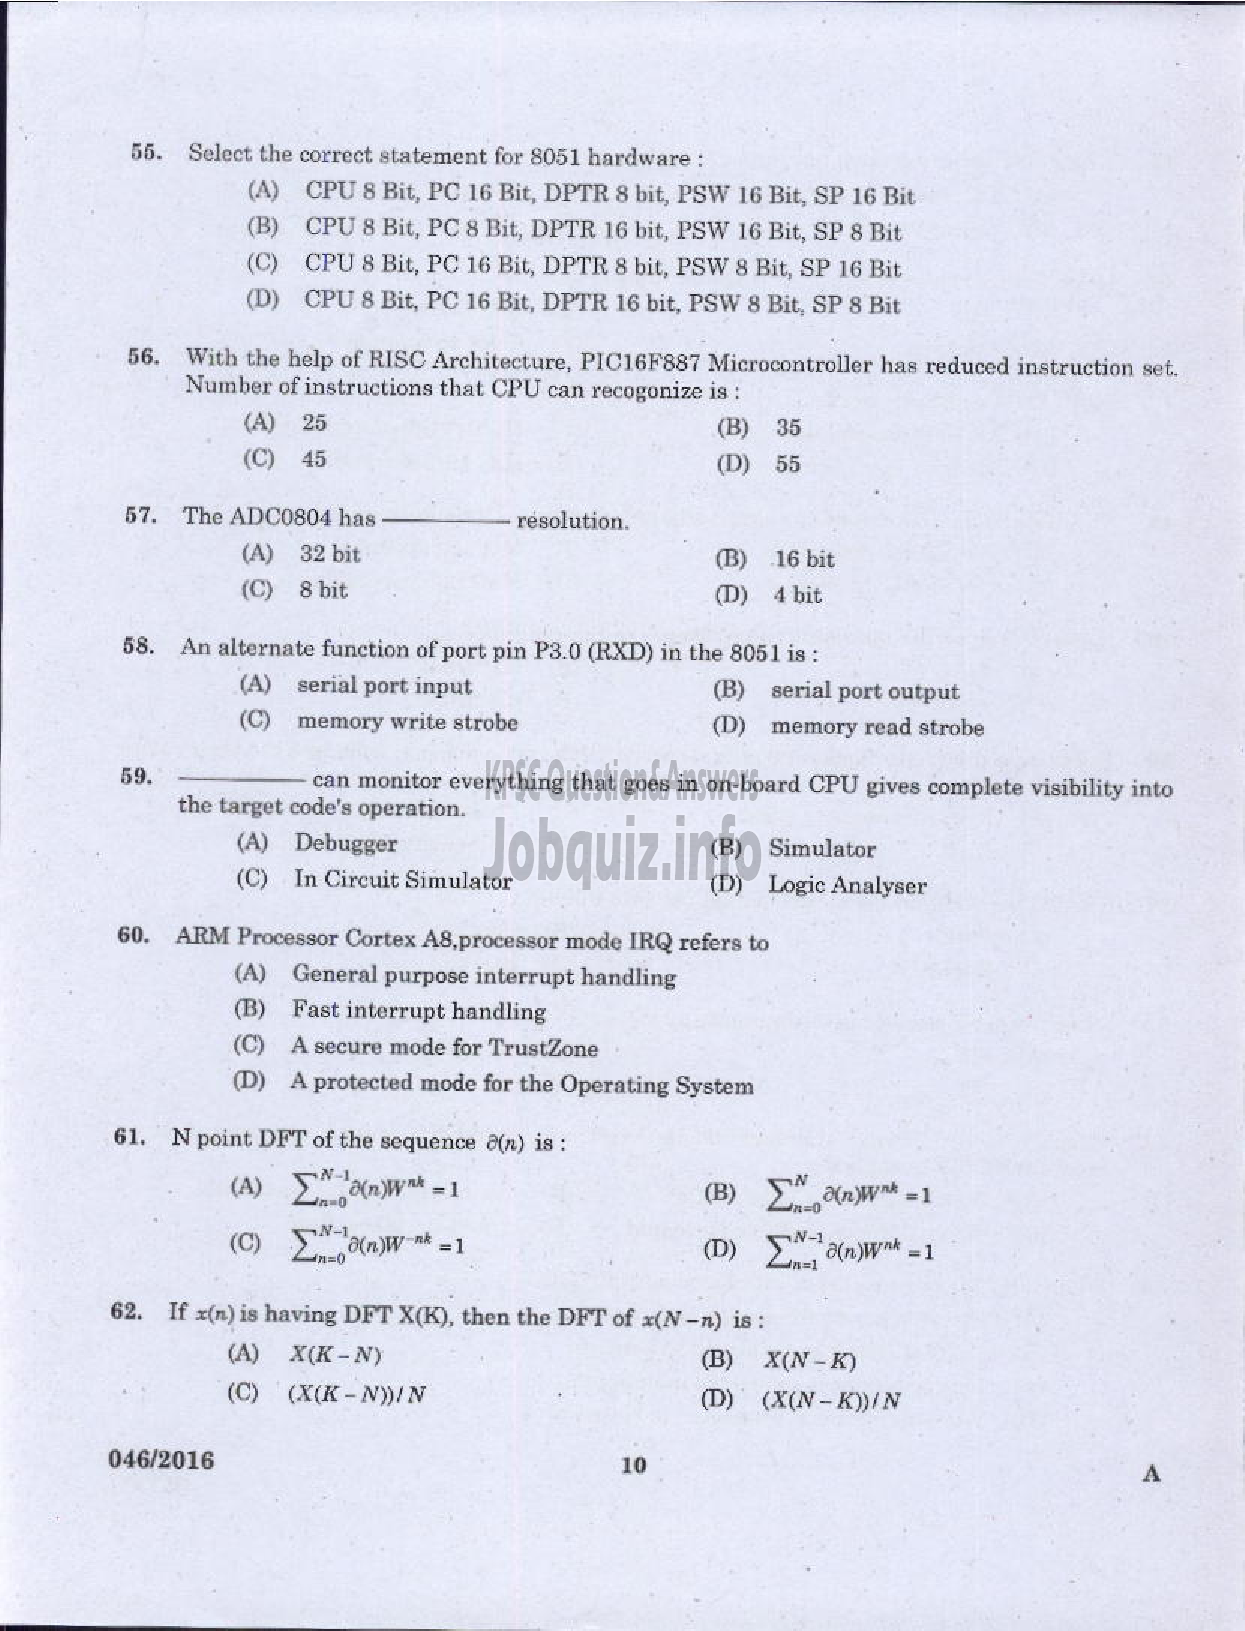 Kerala PSC Question Paper - VOCATIONAL TEACHER MAINTENANCE AND REPAIRS OF RADIO AND TELEVISION-8